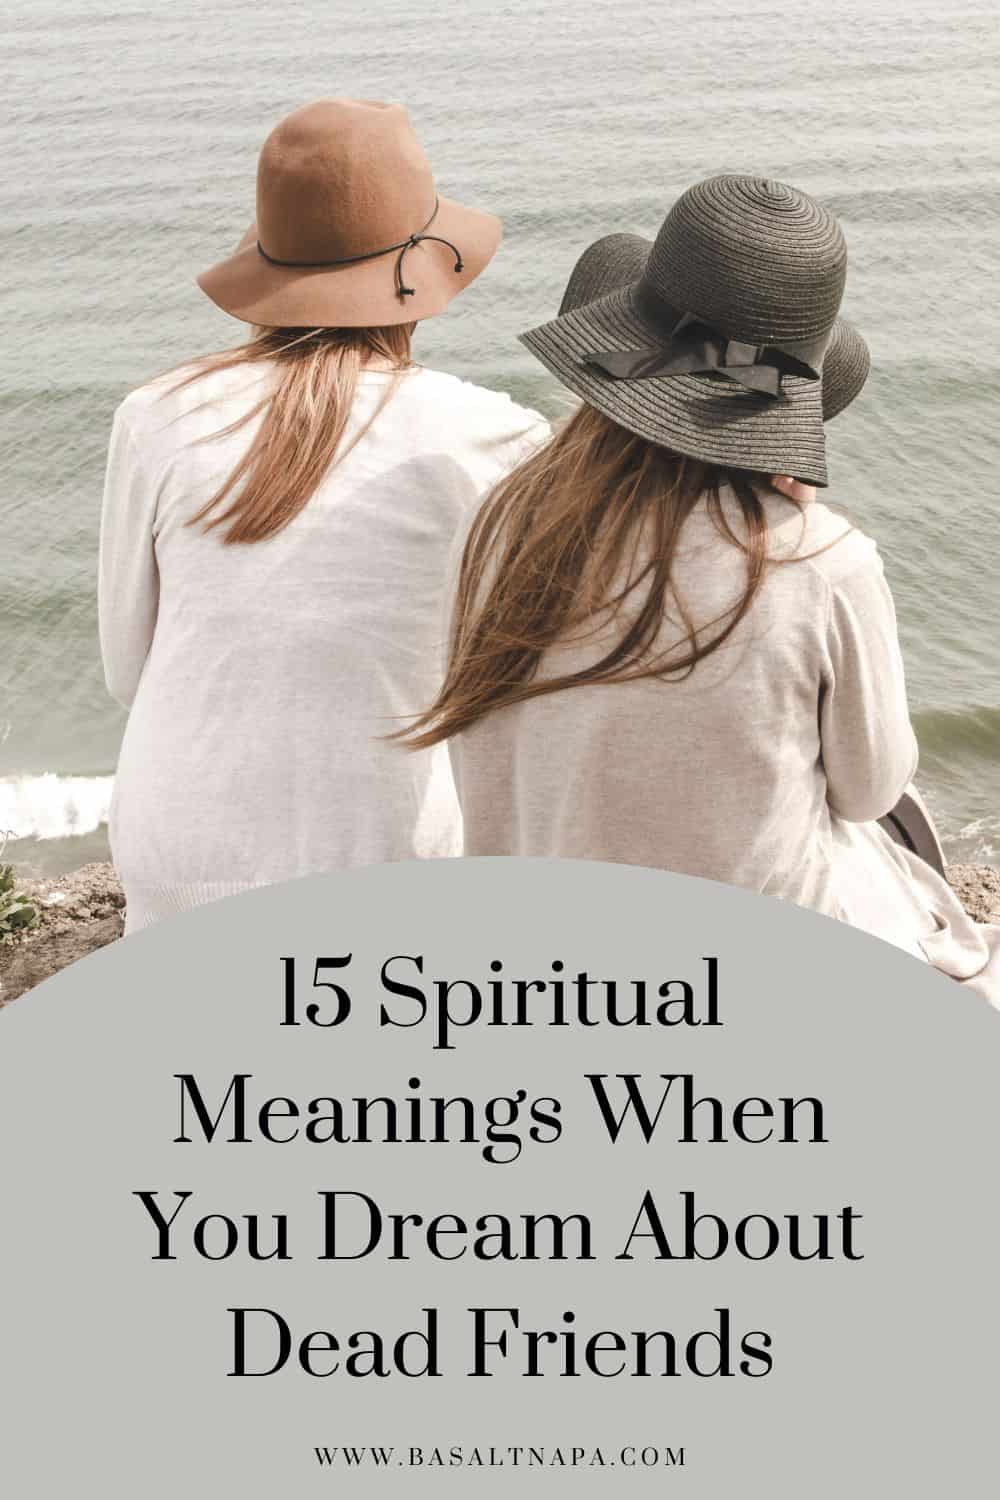 15 Spiritual Meanings When You Dream About Dead Friends